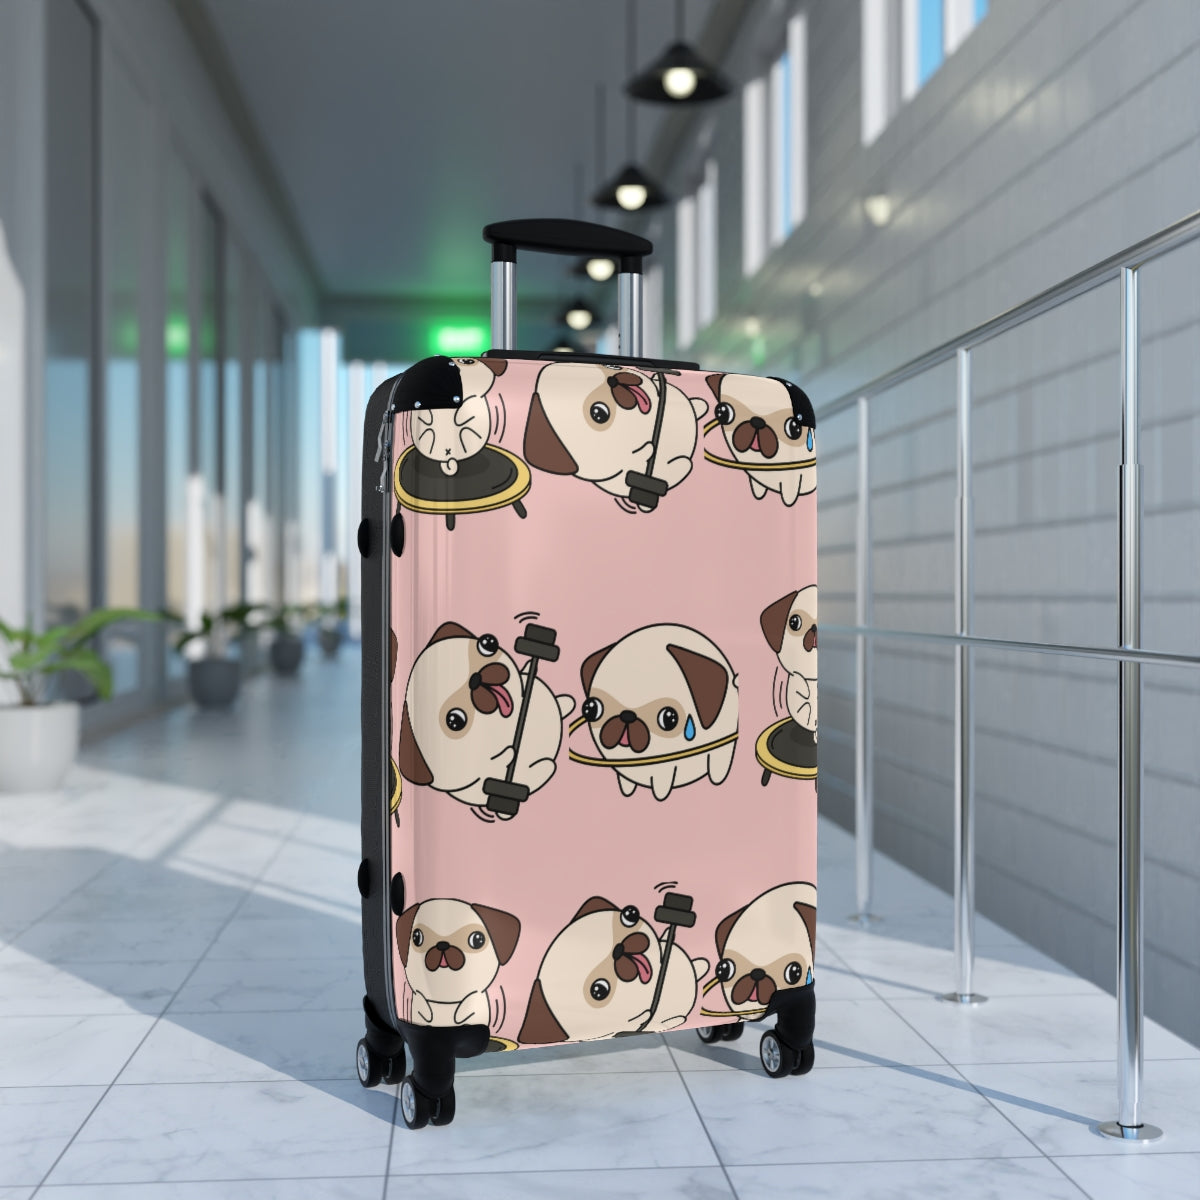 SUITCASES LUGGAGE BY Artzira, All Sizes, Artistic Designs, Double Wheeled Spinner